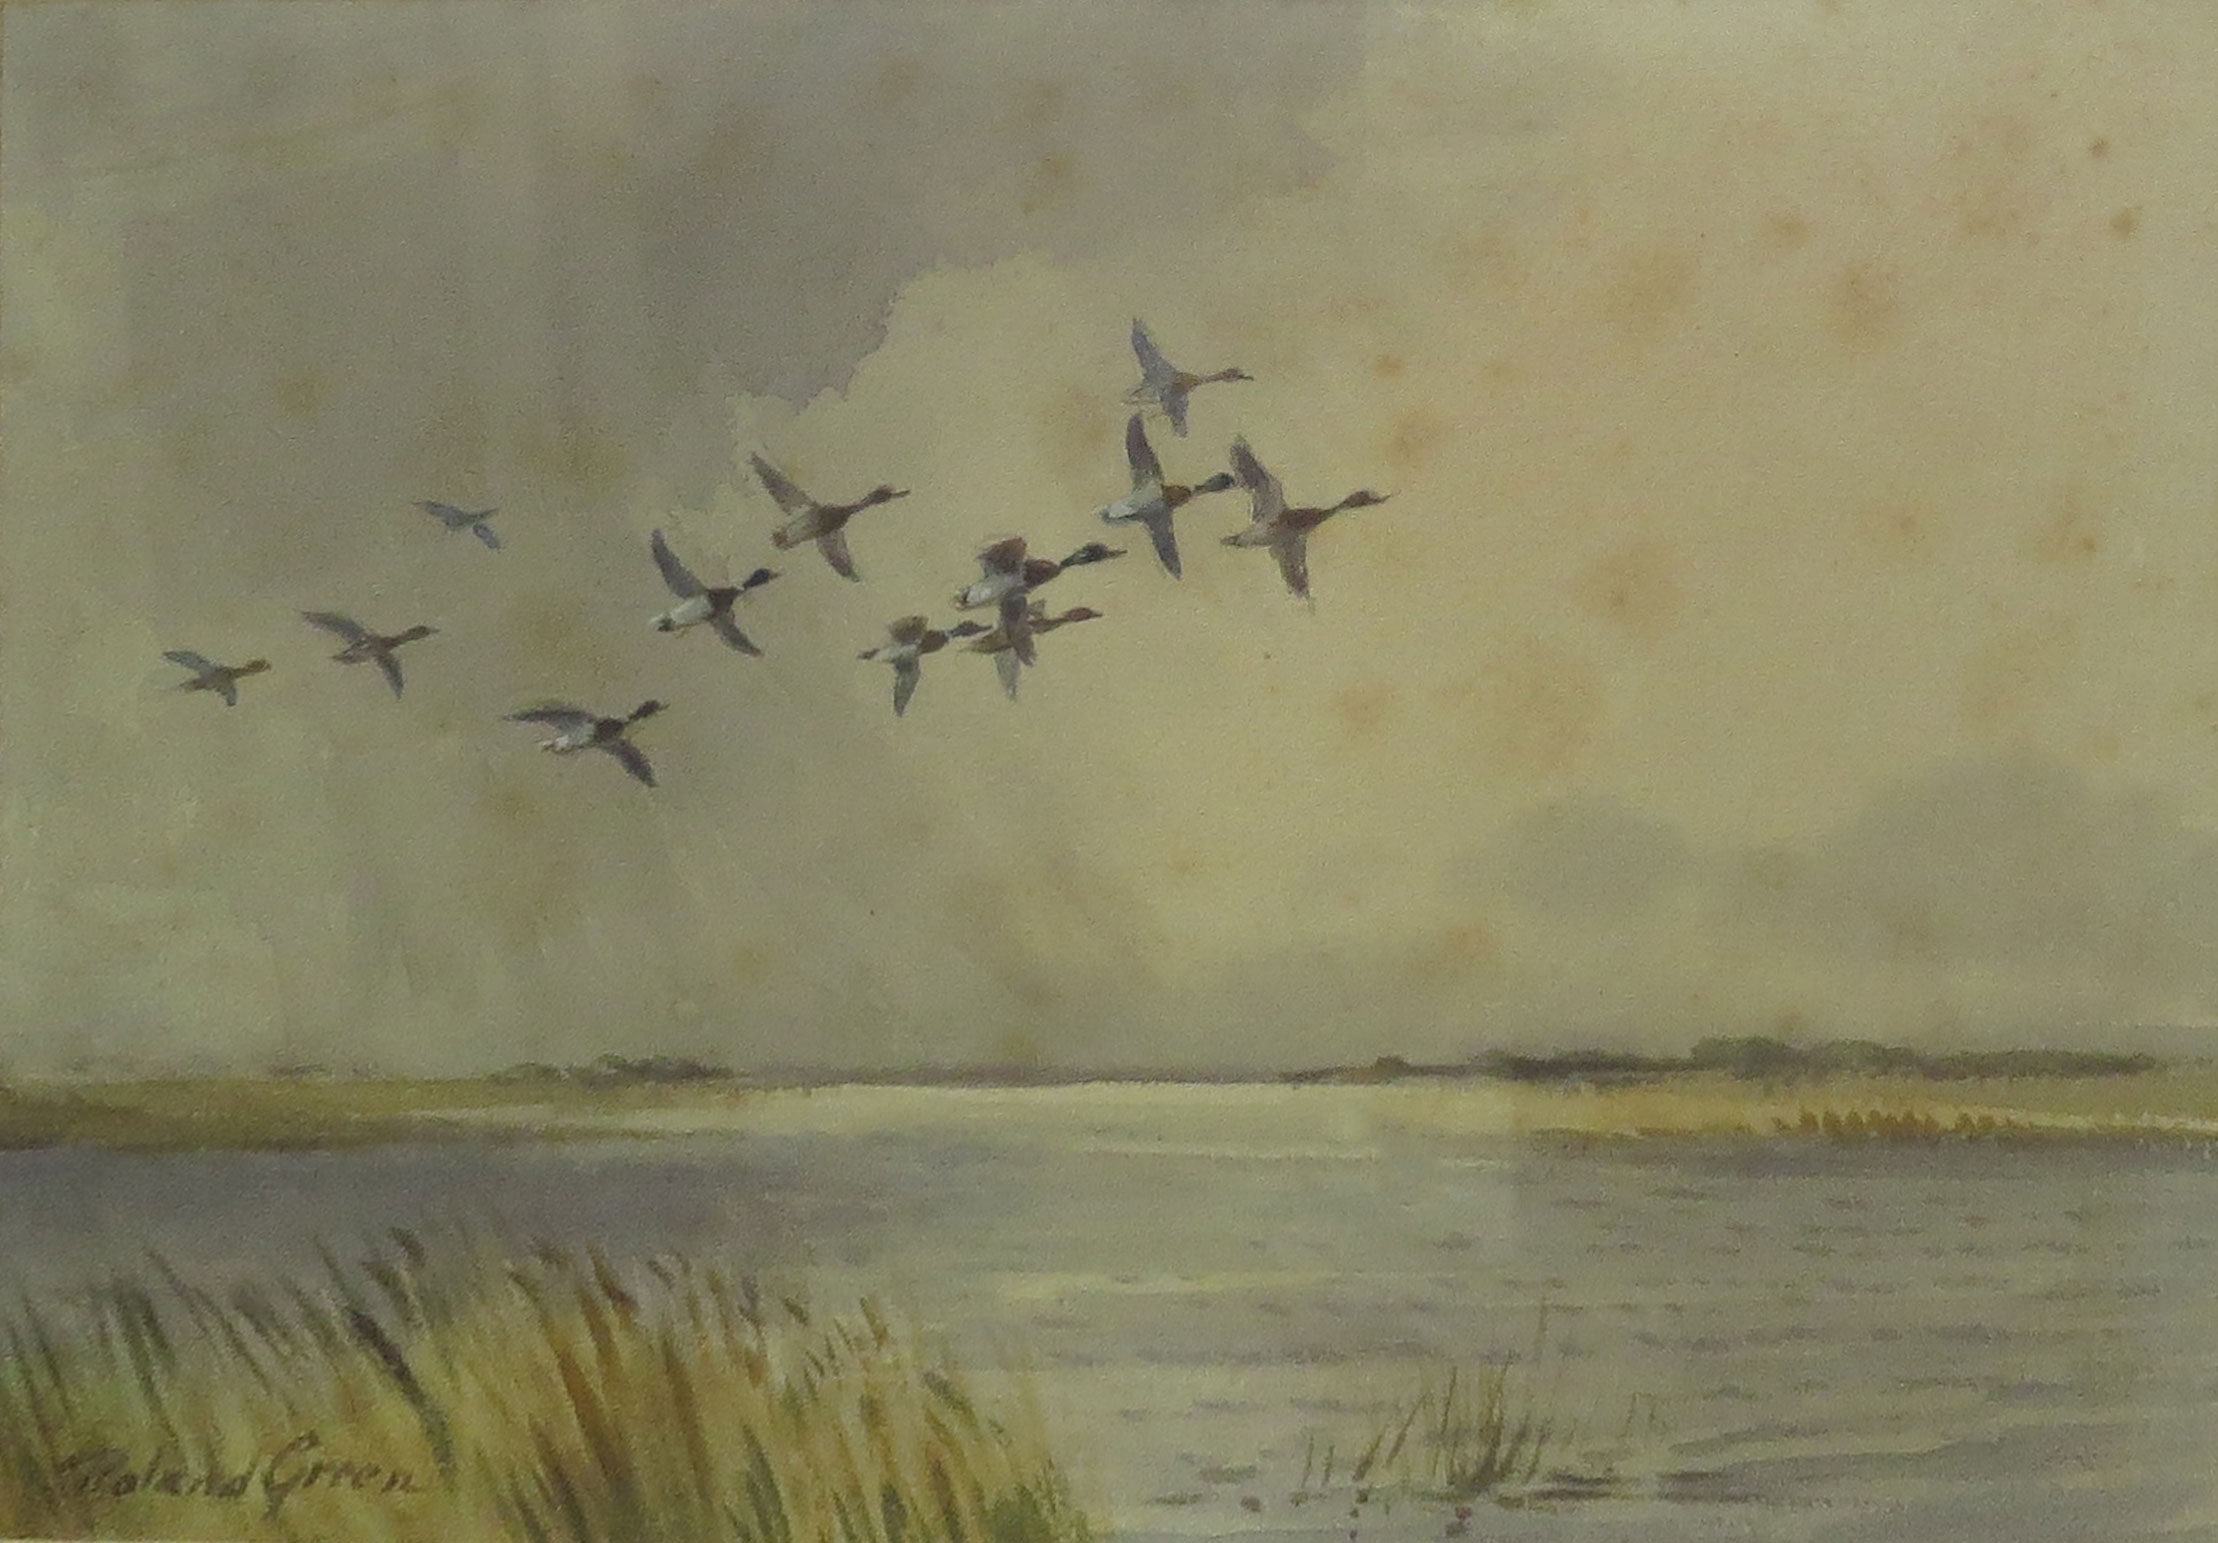 Roland Green (1896-1972), Ducks in Flight, pair of watercolours, both signed, 17 x 26cm - Image 2 of 2